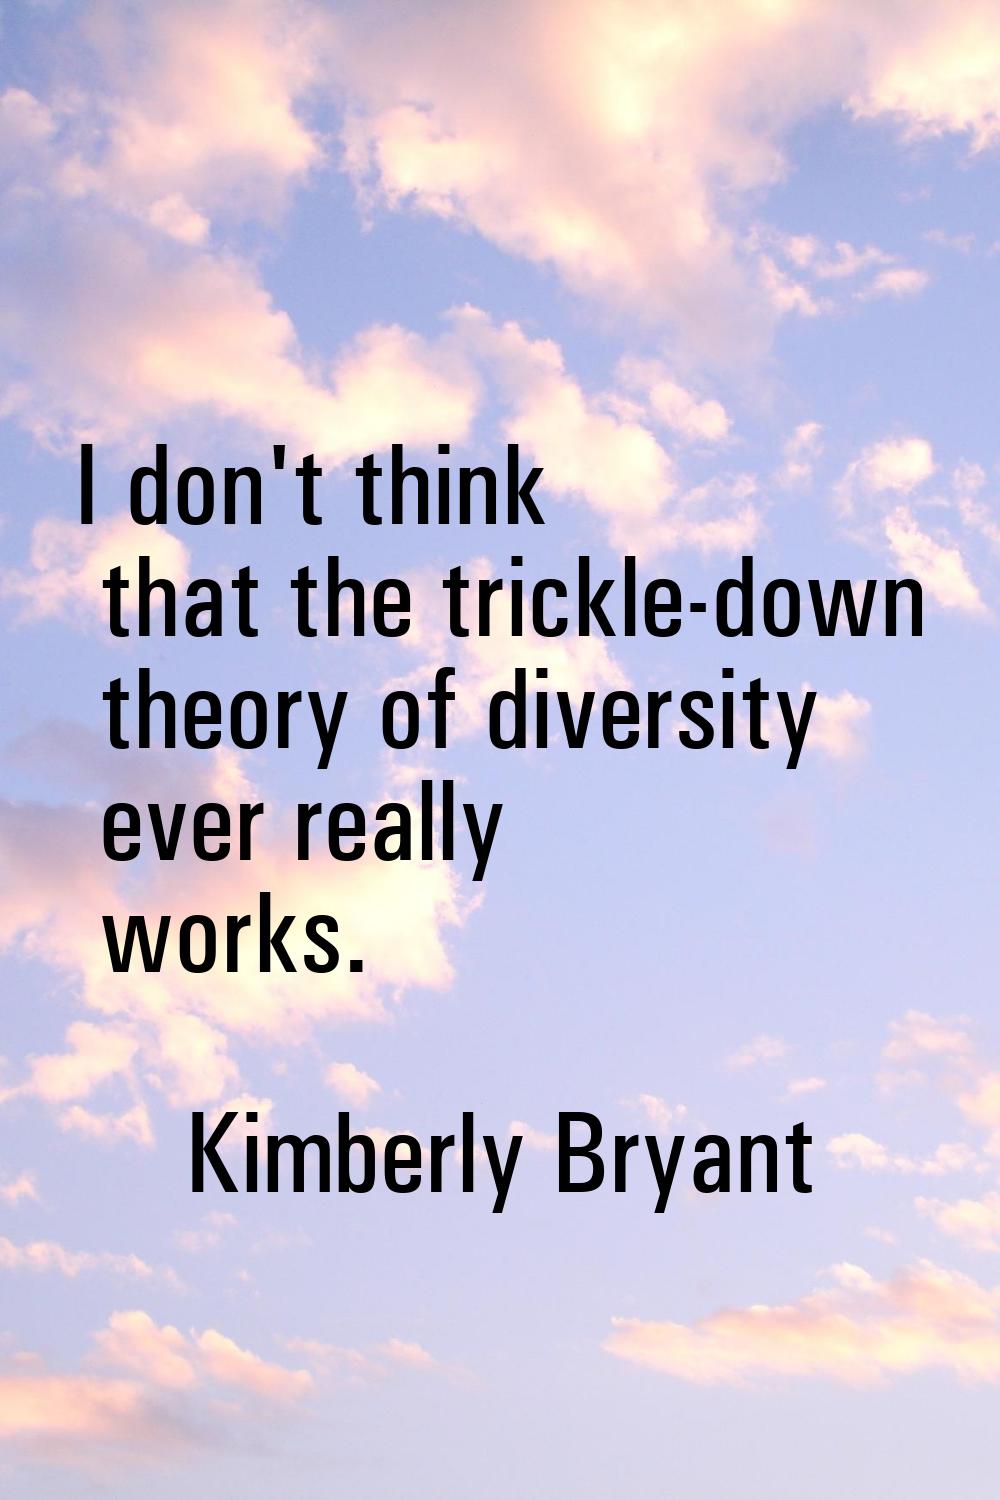 I don't think that the trickle-down theory of diversity ever really works.